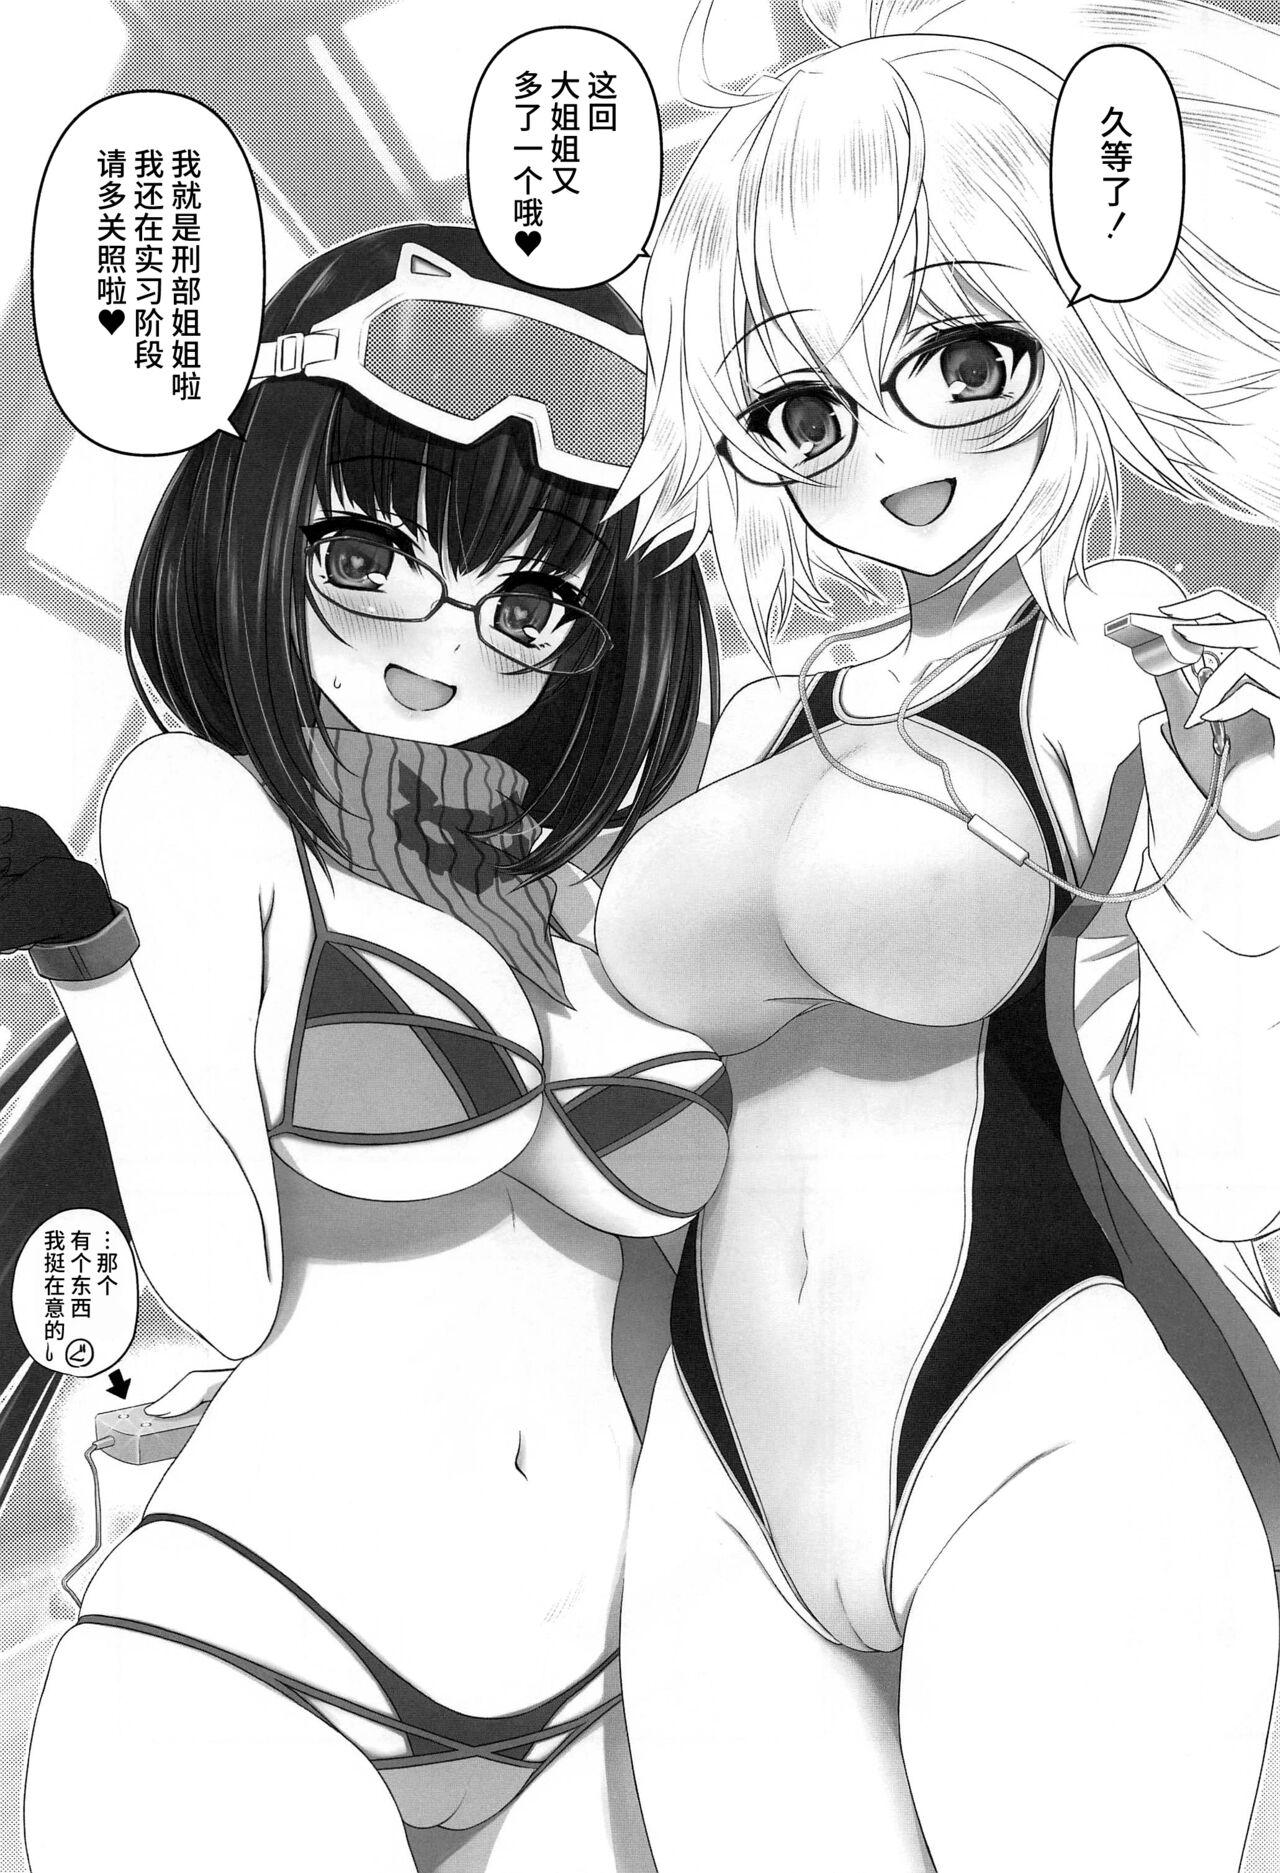 This (CT41) [Yakan Honpo (Inoue Tommy)] Kyouei Mizugi Onee-chan to Daitan Mizugi Onee-chan (Fate/Grand Order) [Chinese] [不咕鸟汉化组] - Fate grand order 18 Year Old Porn - Page 2